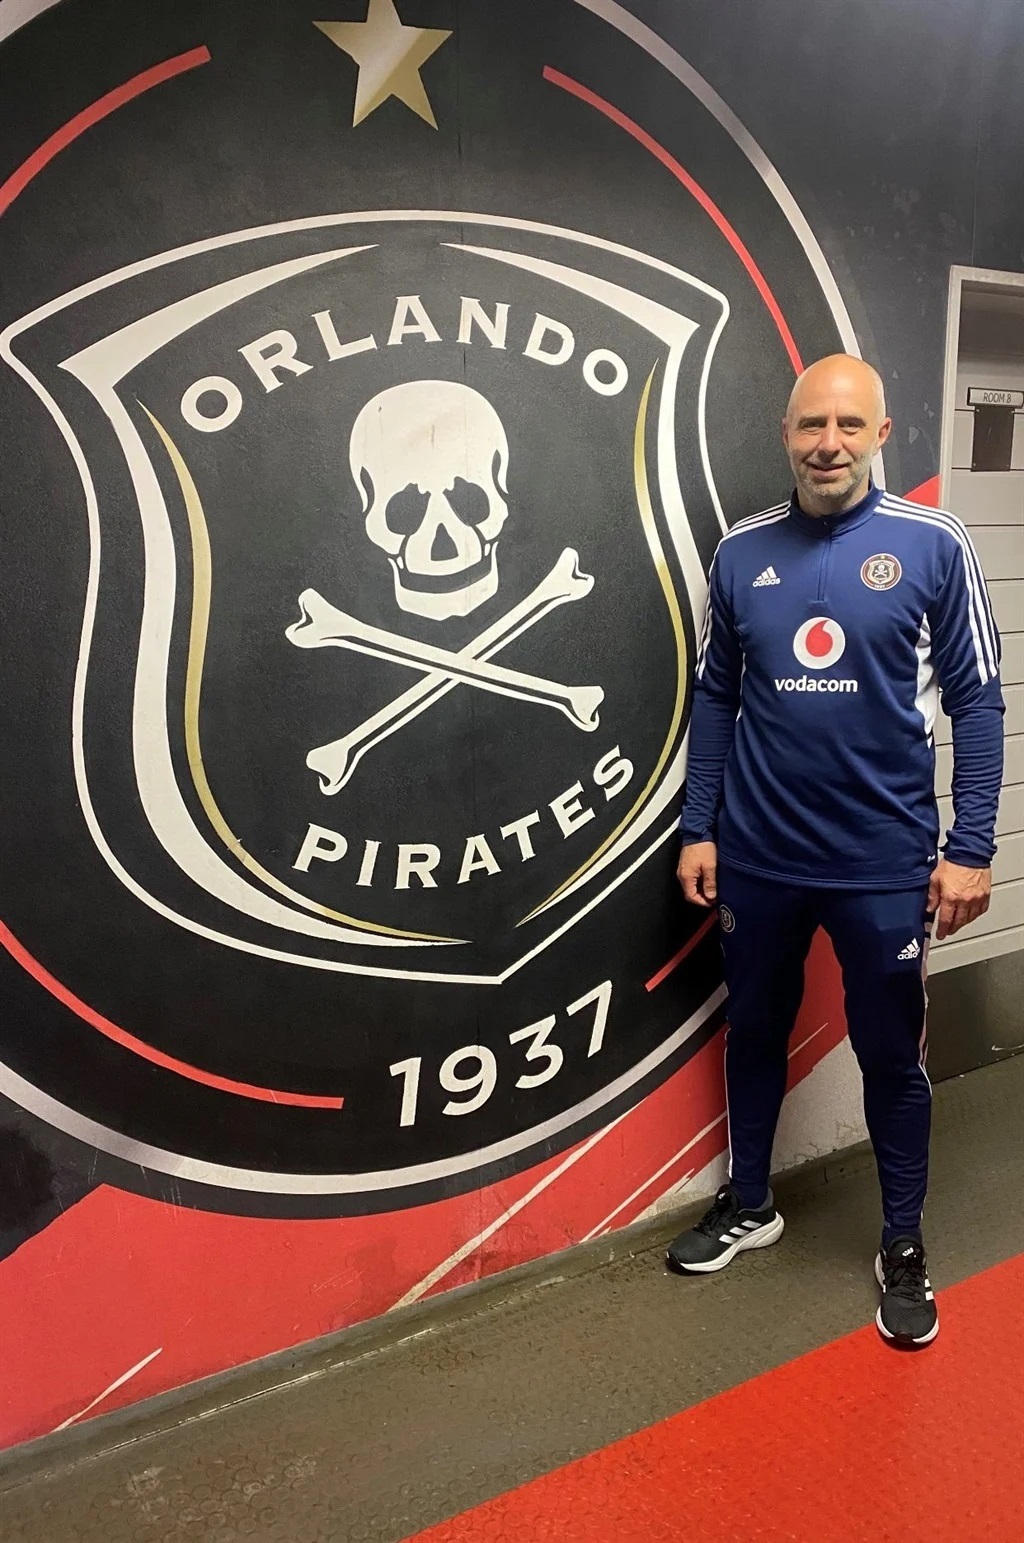 Scott Chickelday during his time as striker coach at Orlando Pirates